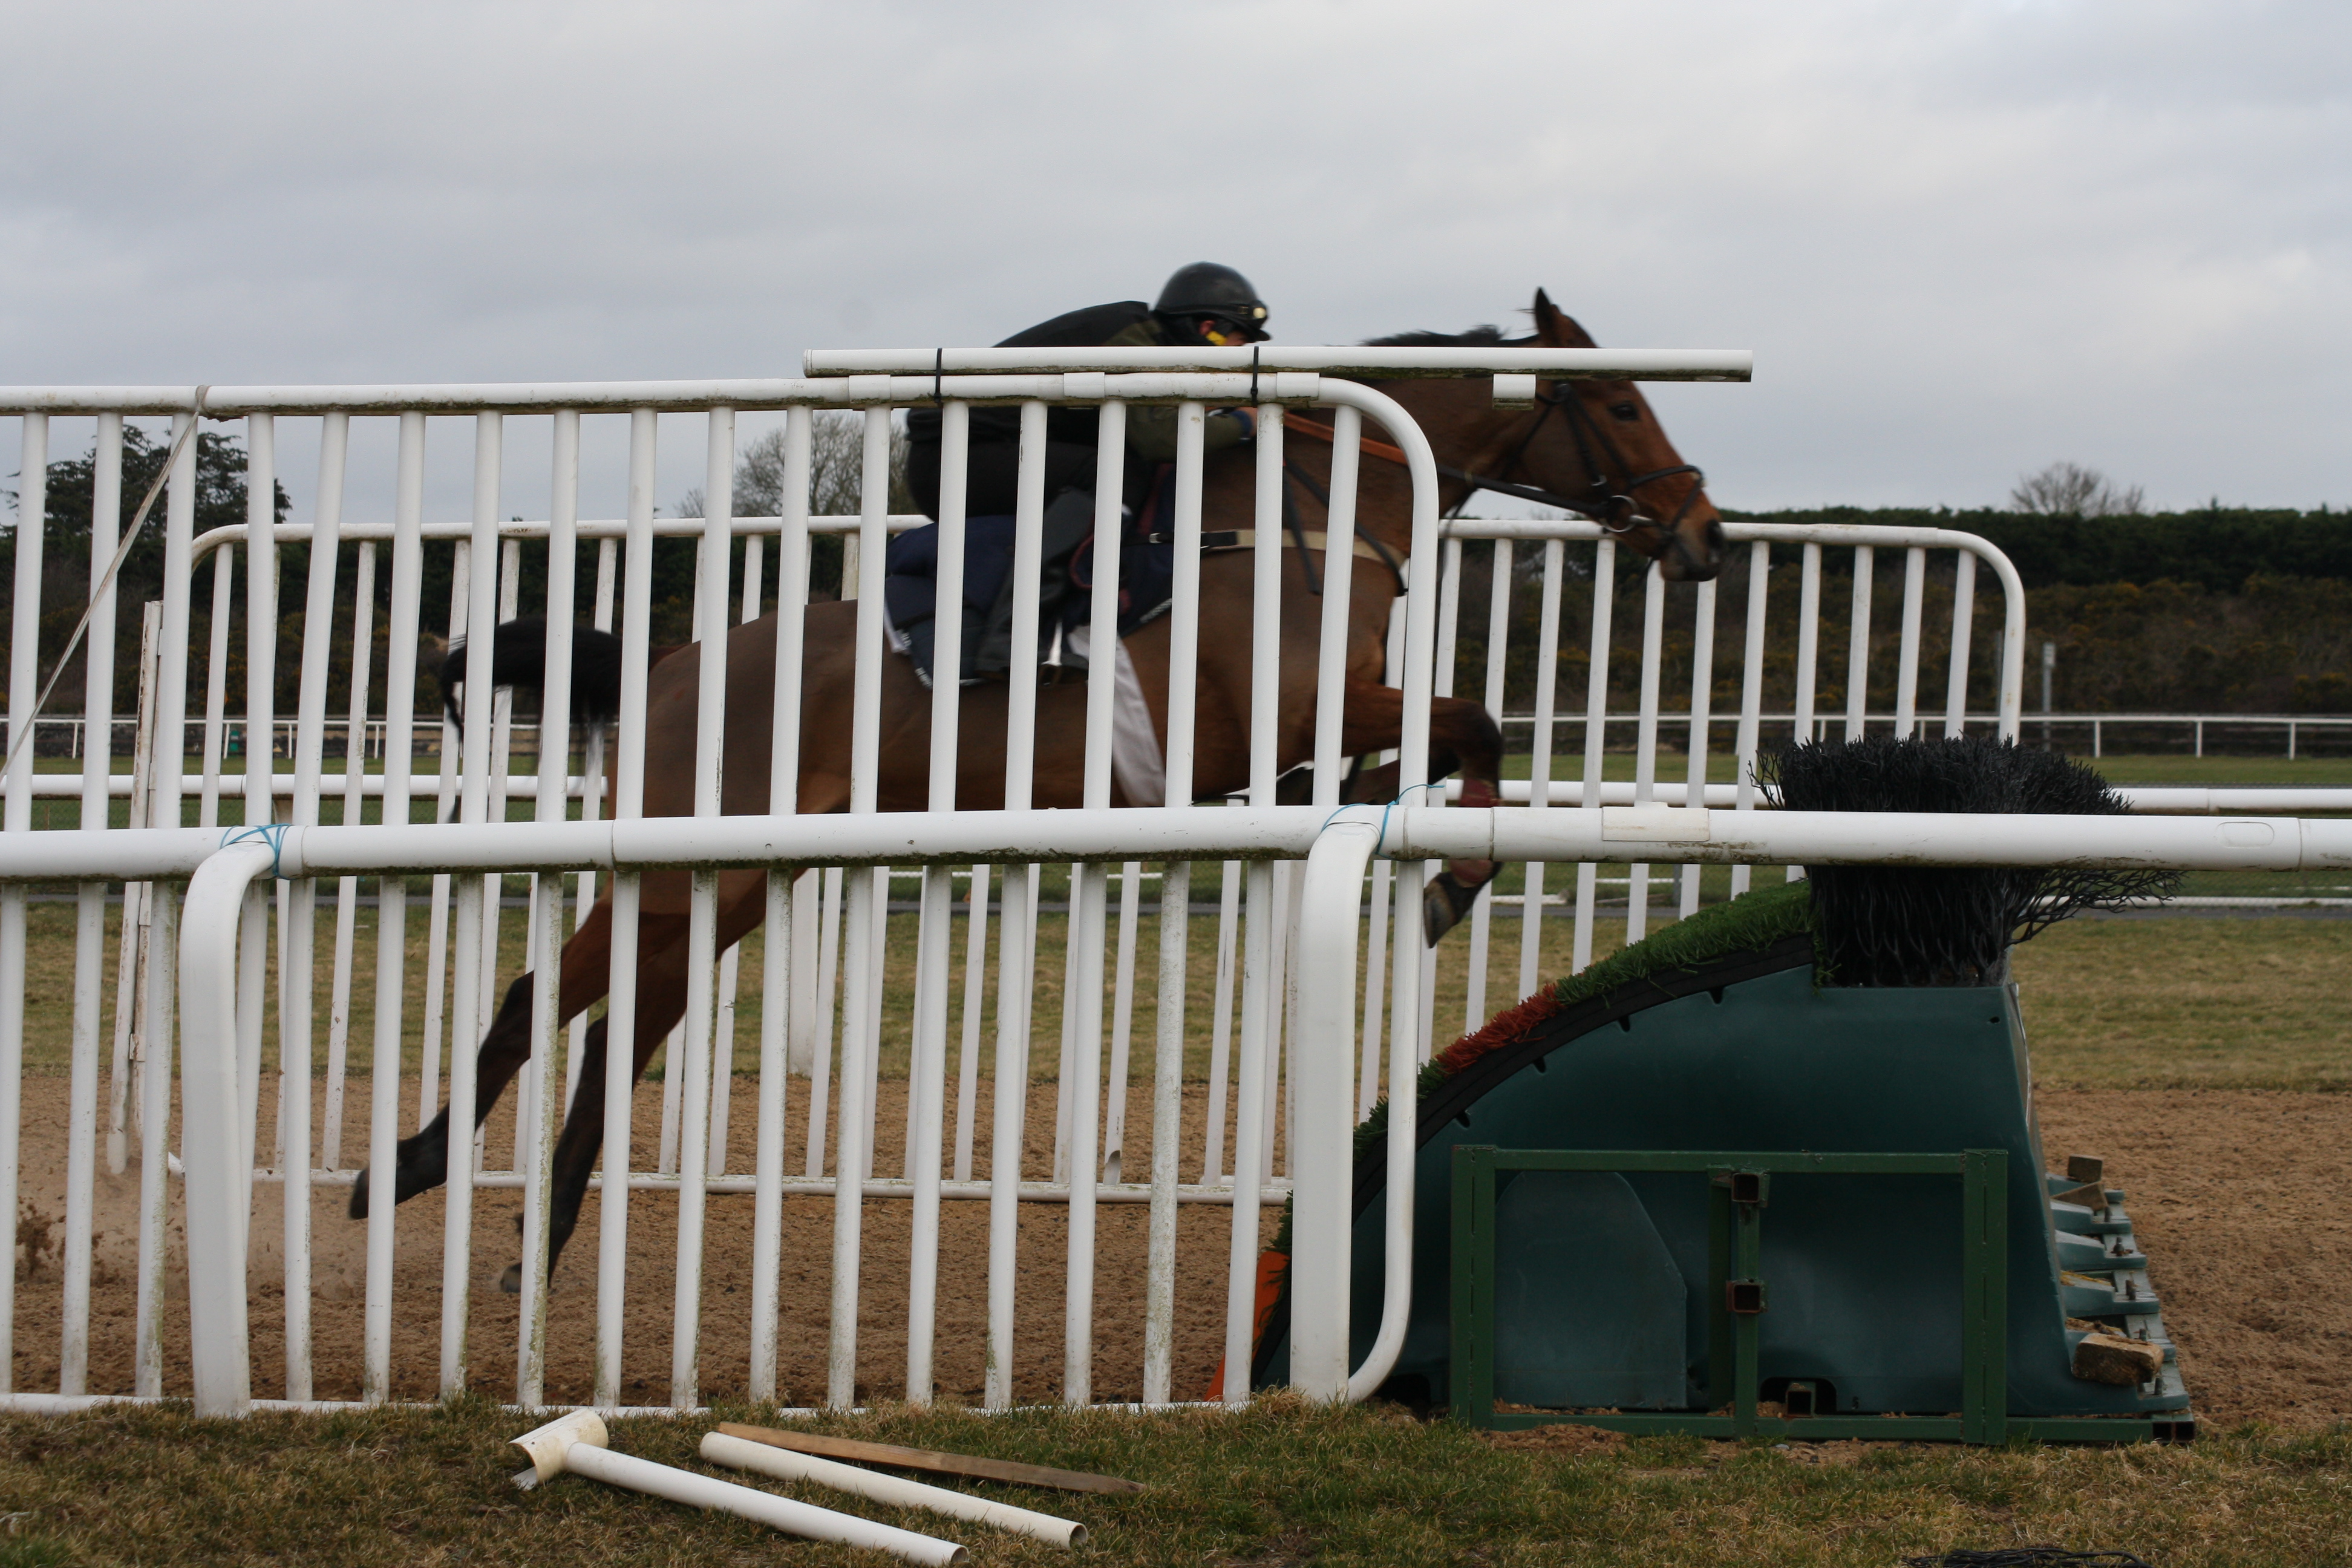 Australian Jump Jockeys being put through their paces over fences on the Curragh.